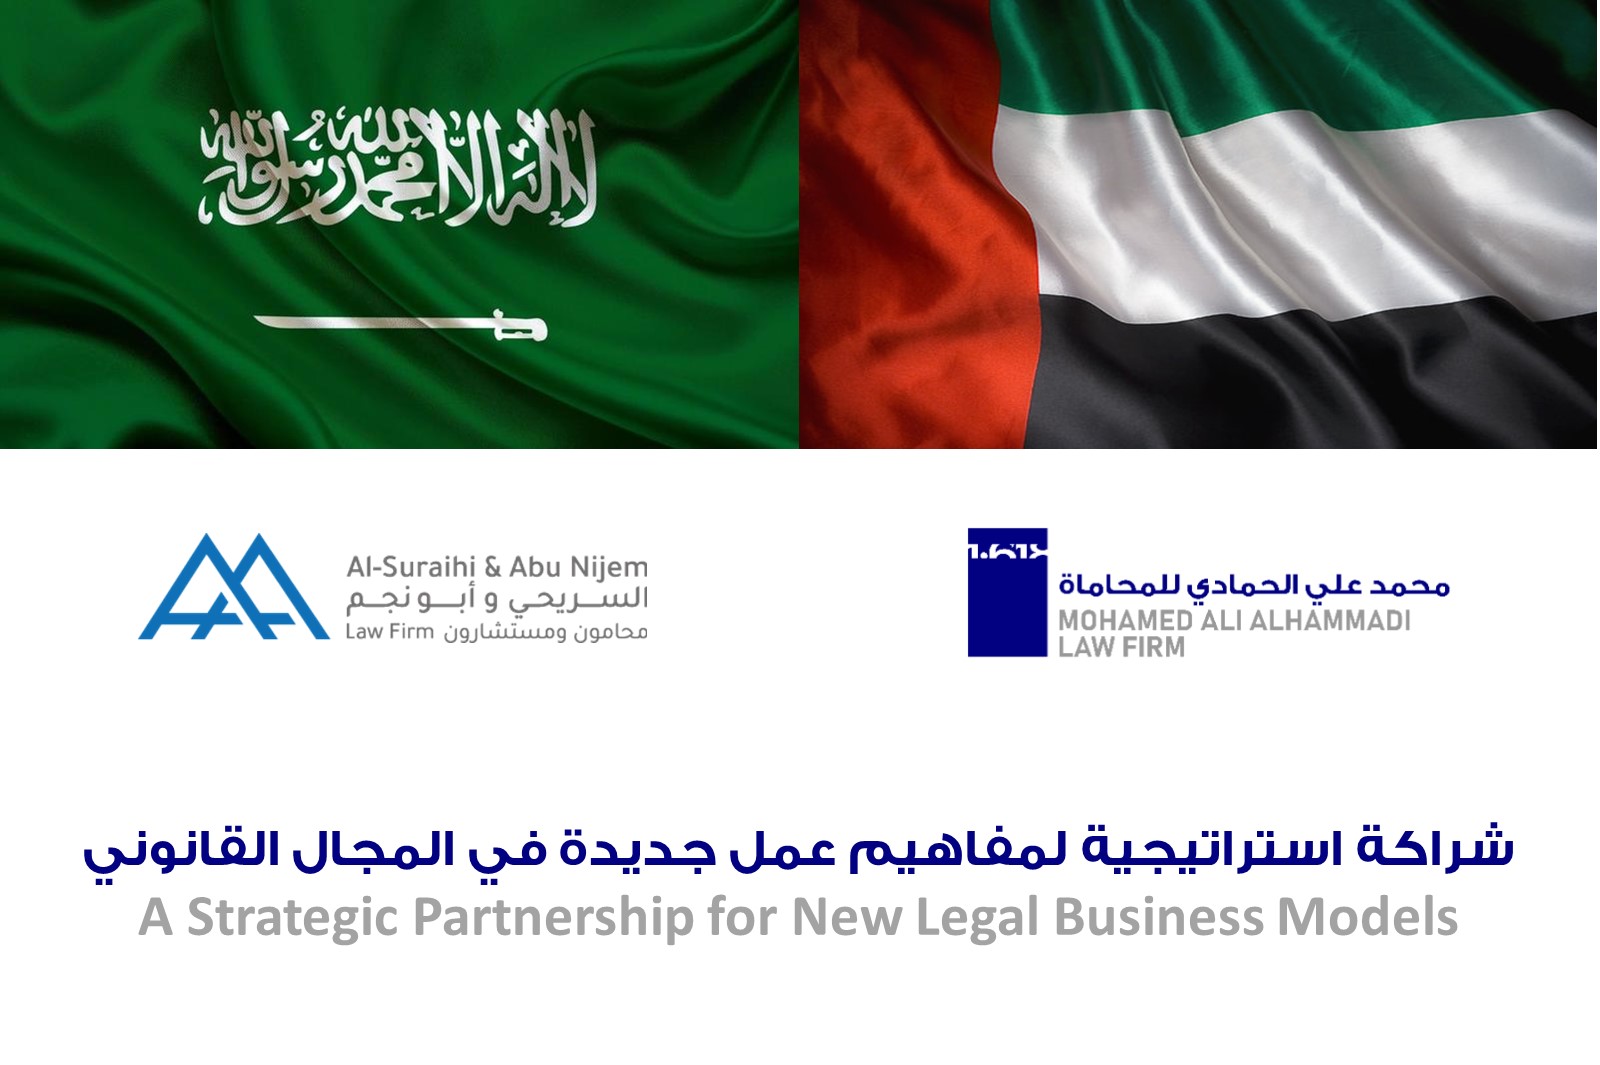 Mohamad Ali Alhammadi Law Firm signs a strategic partnership to exchange knowledge with Al-Suraihi & Abu Nejim Law Firm